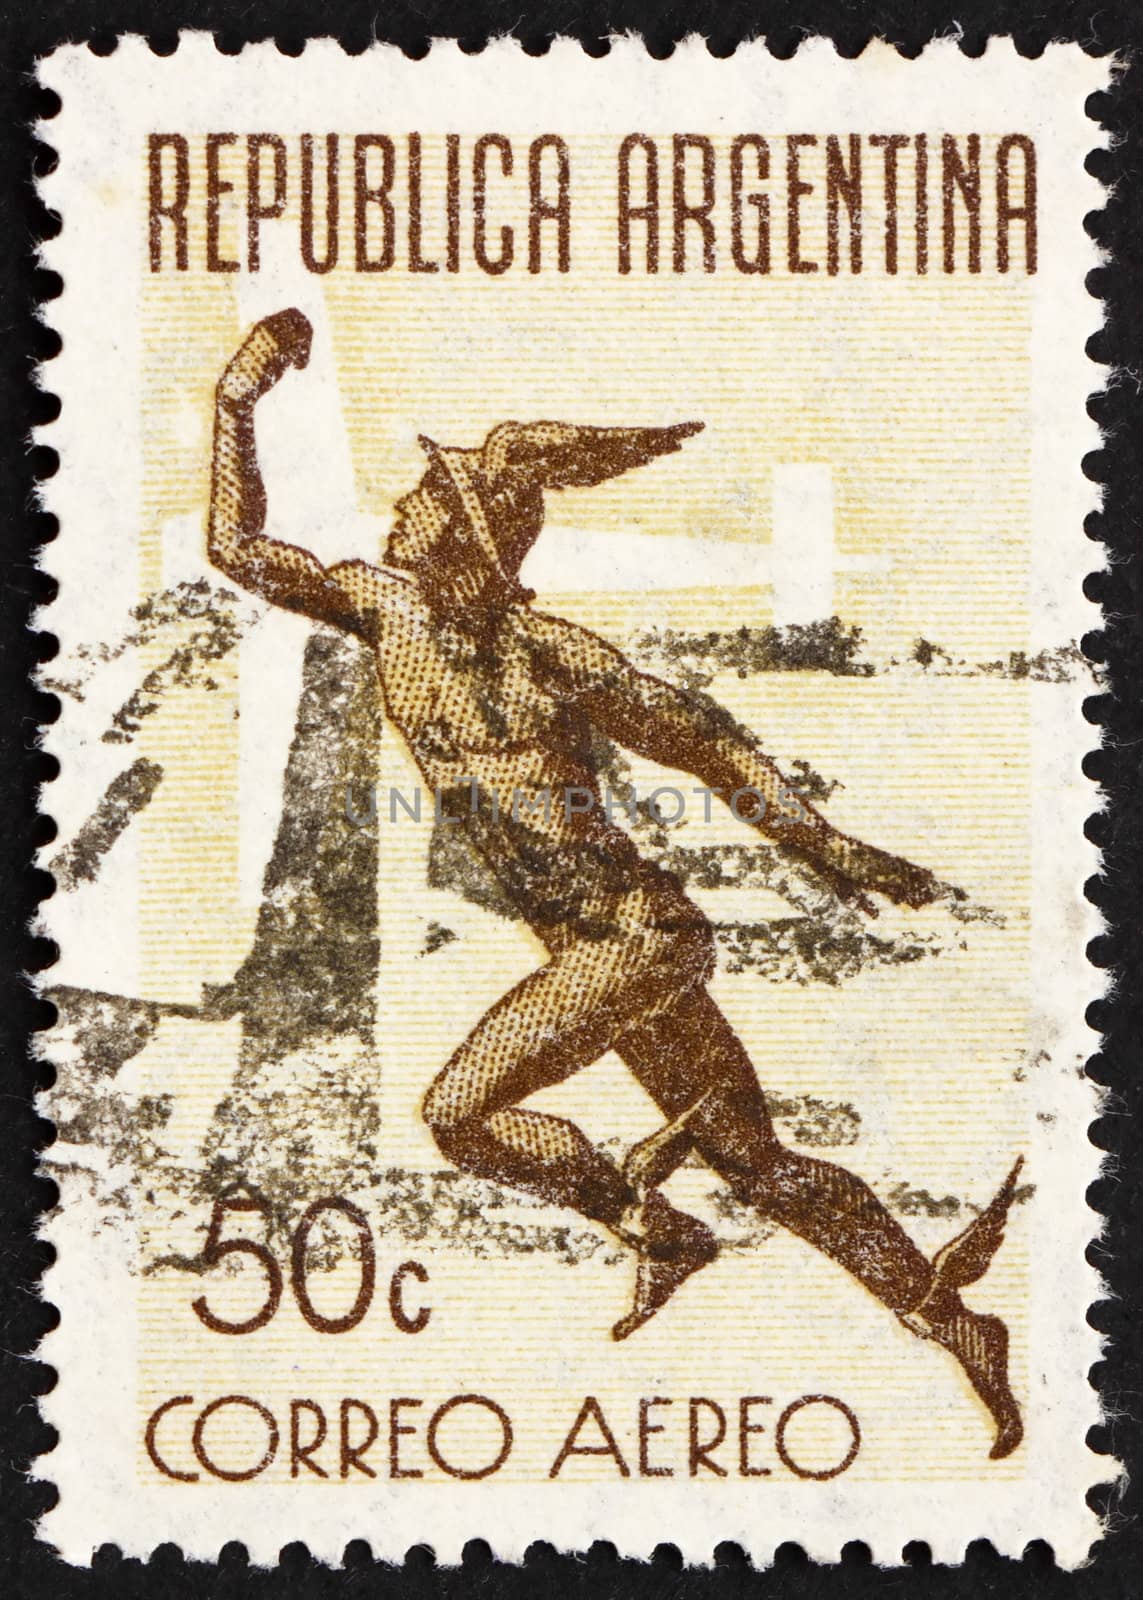 ARGENTINA - CIRCA 1942: a stamp printed in the Argentina shows Mercury and Plane, circa 1942